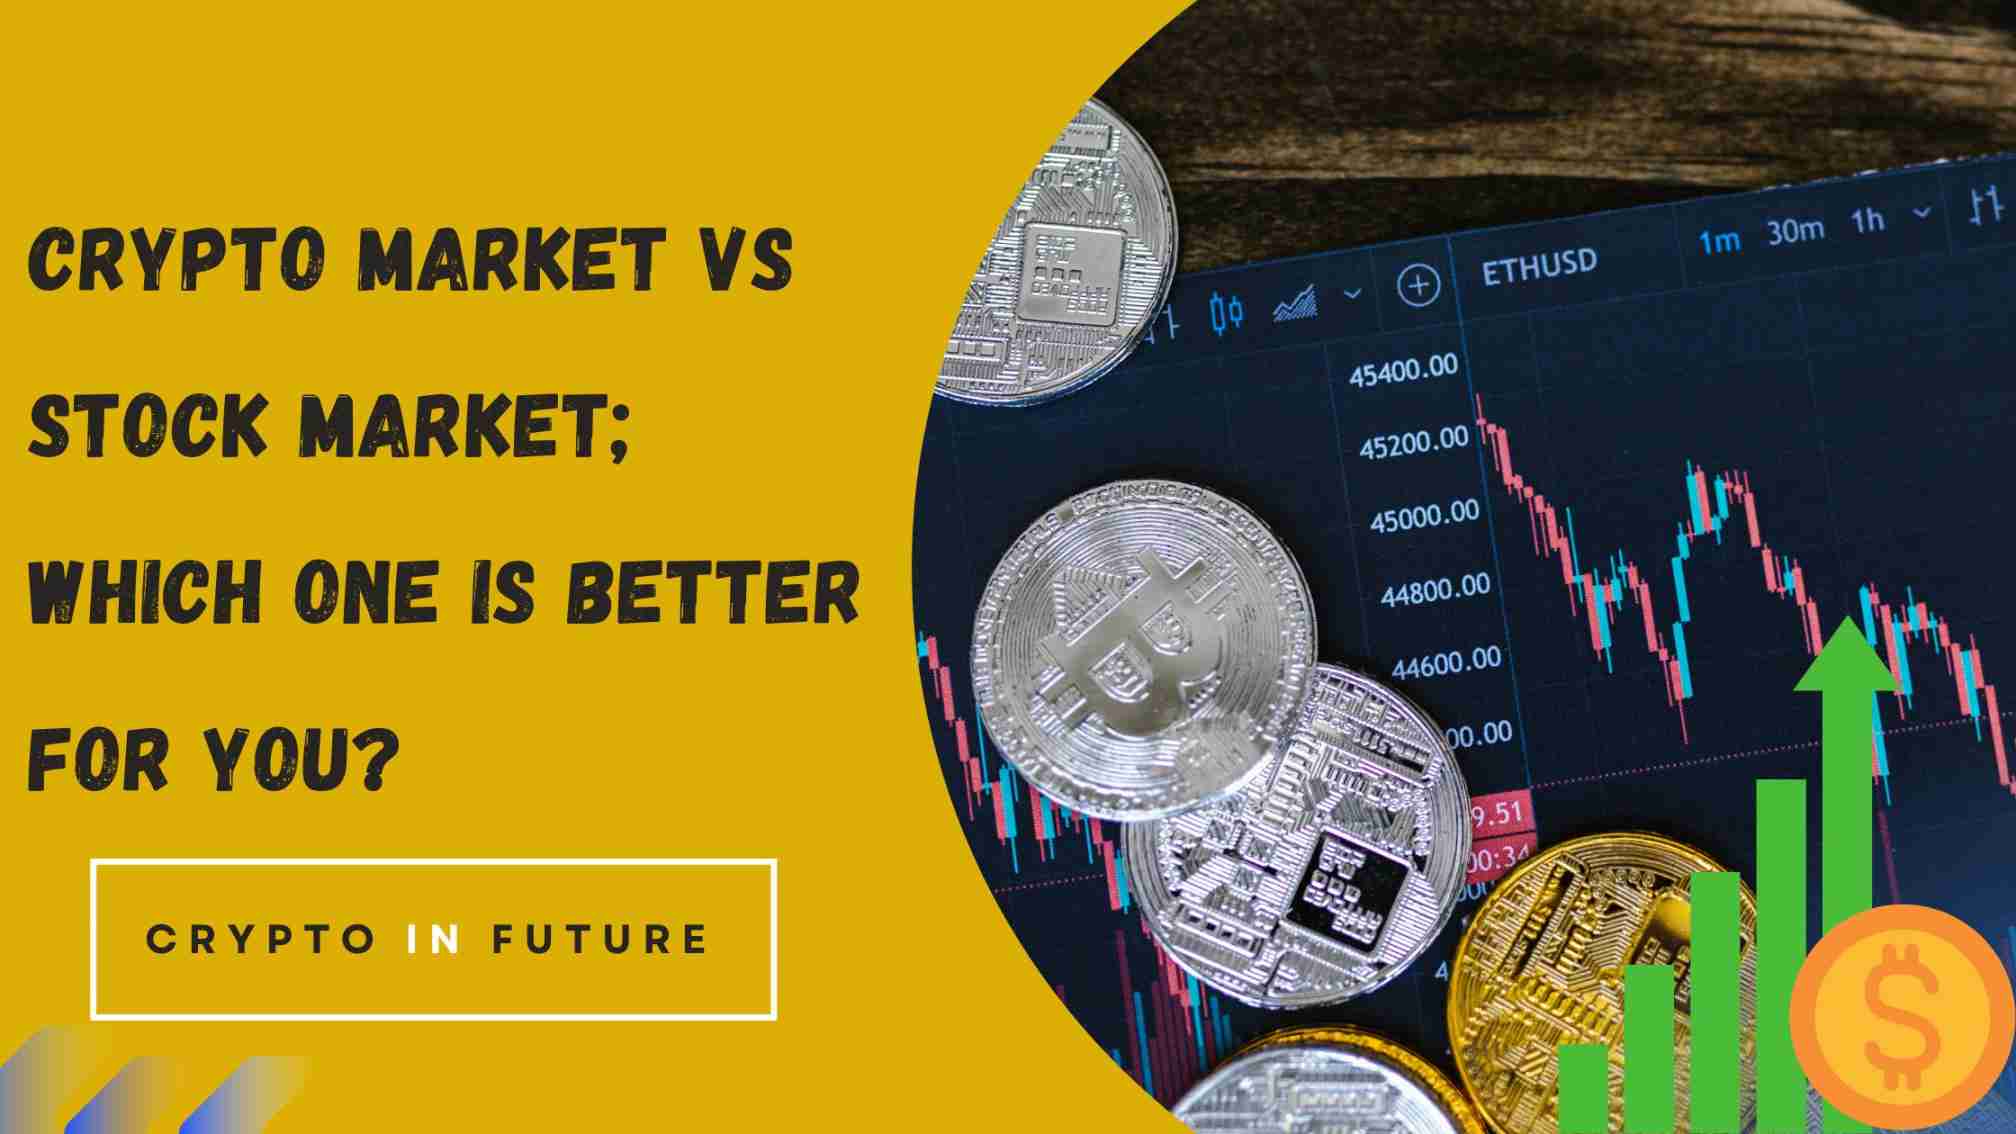 Crypto Market Vs Stock Market; Which one Is Better For You?